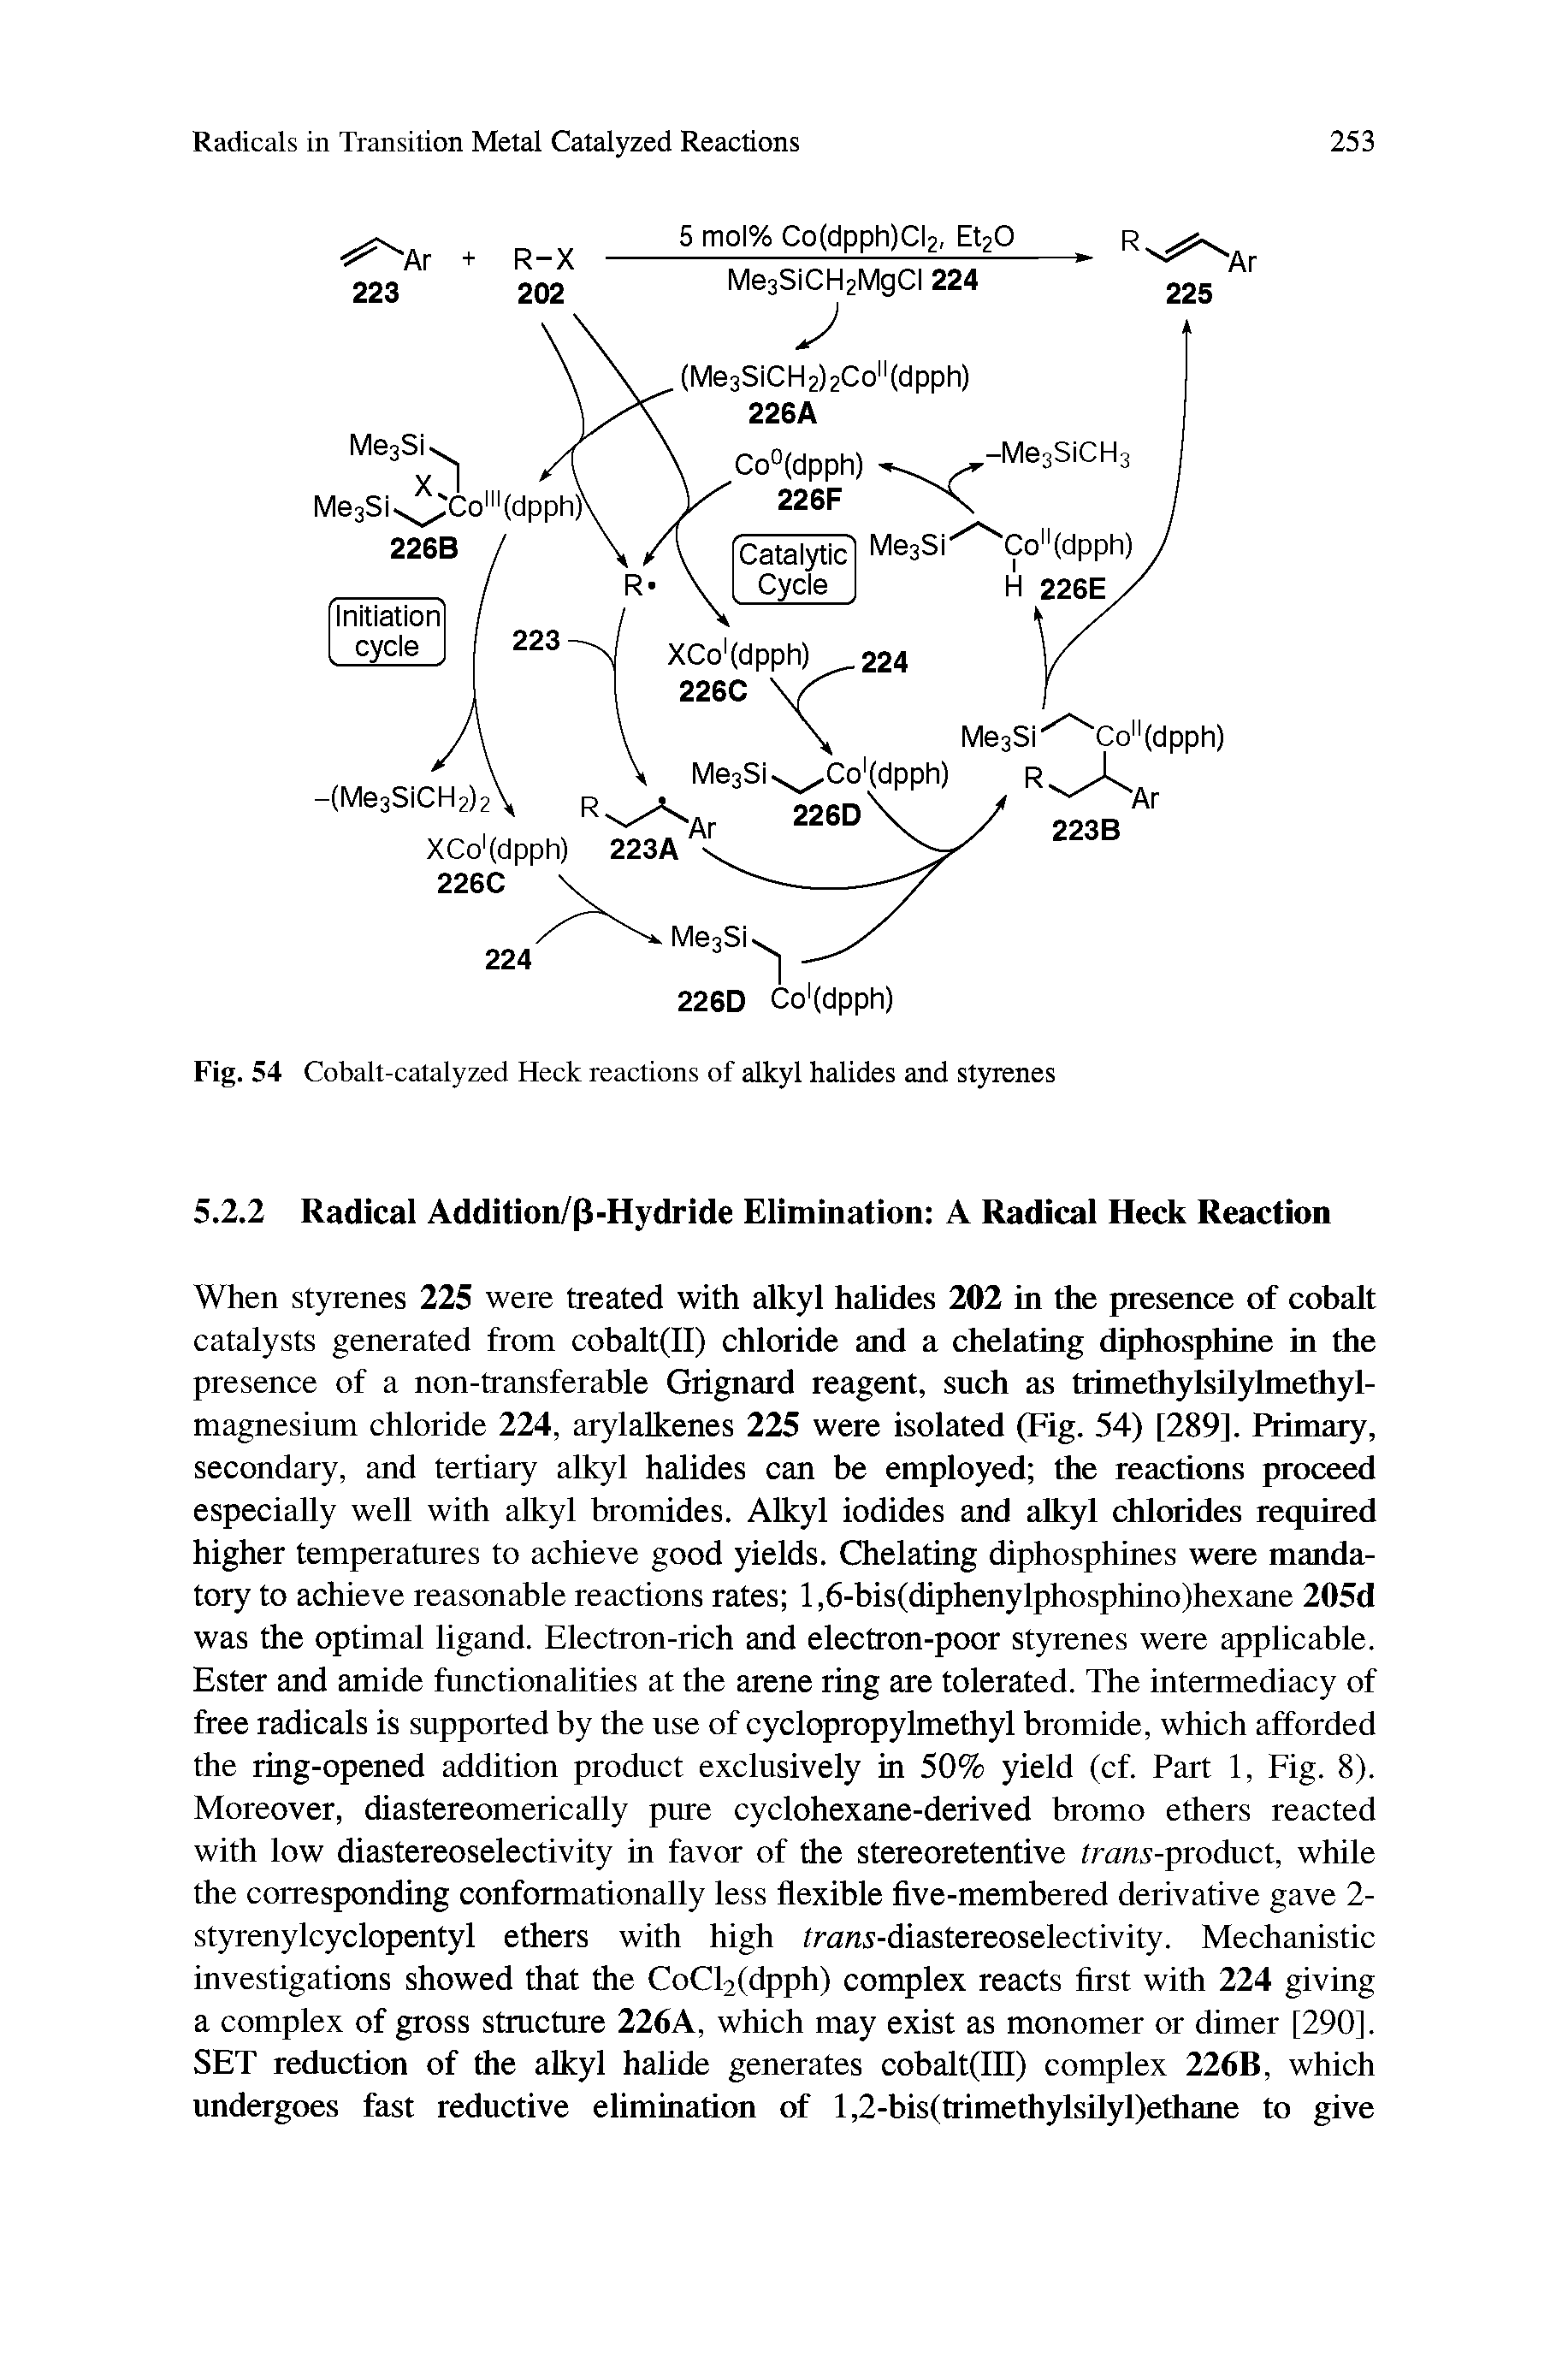 Fig. 54 Cobalt-catalyzed Heck reactions of alkyl halides and styrenes...